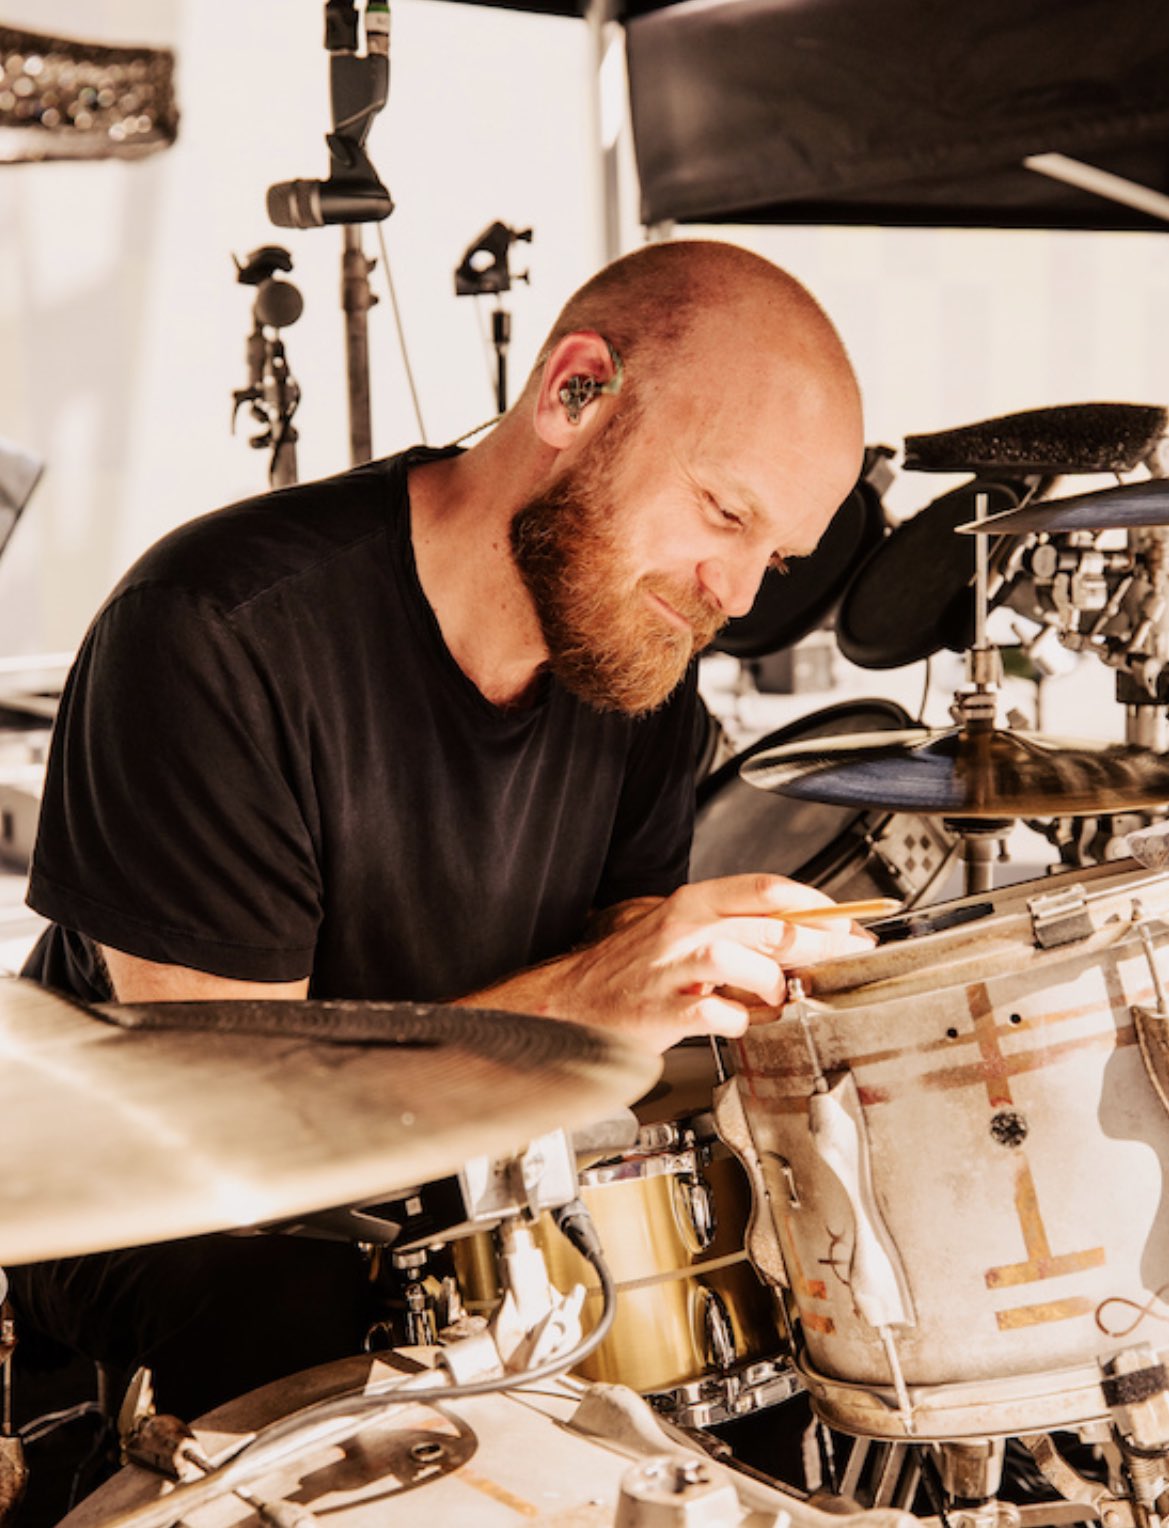 Coldplay Drummer 'in His Place' With Yamaha - Yamaha - United States